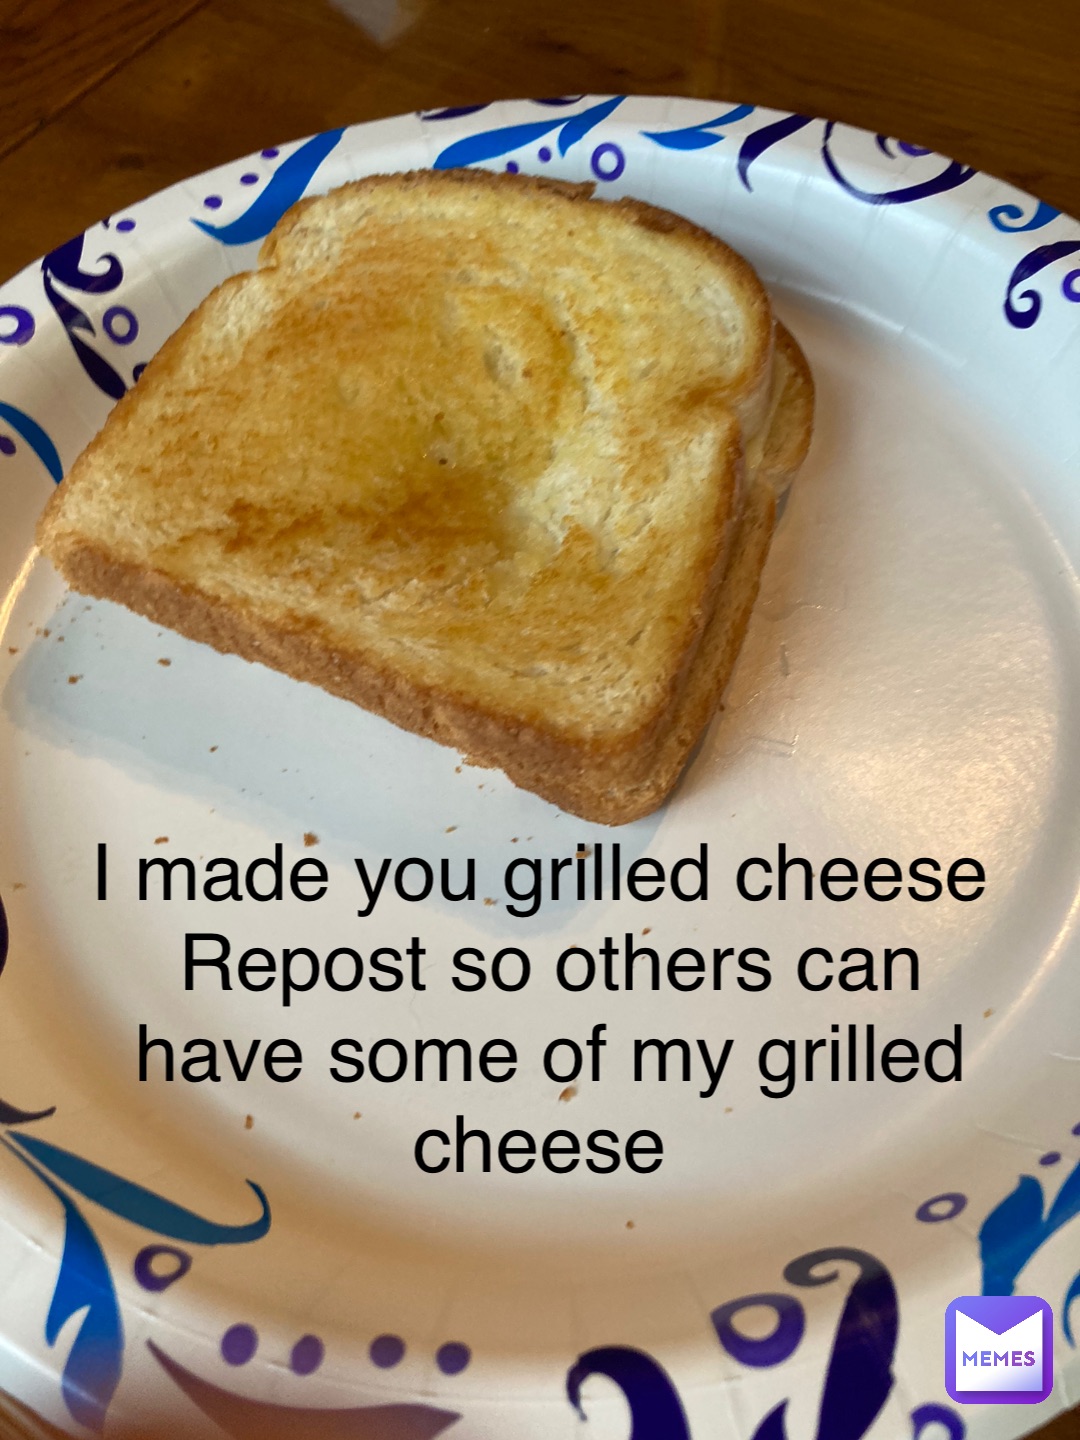 I made you grilled cheese
Repost so others can have some of my grilled cheese